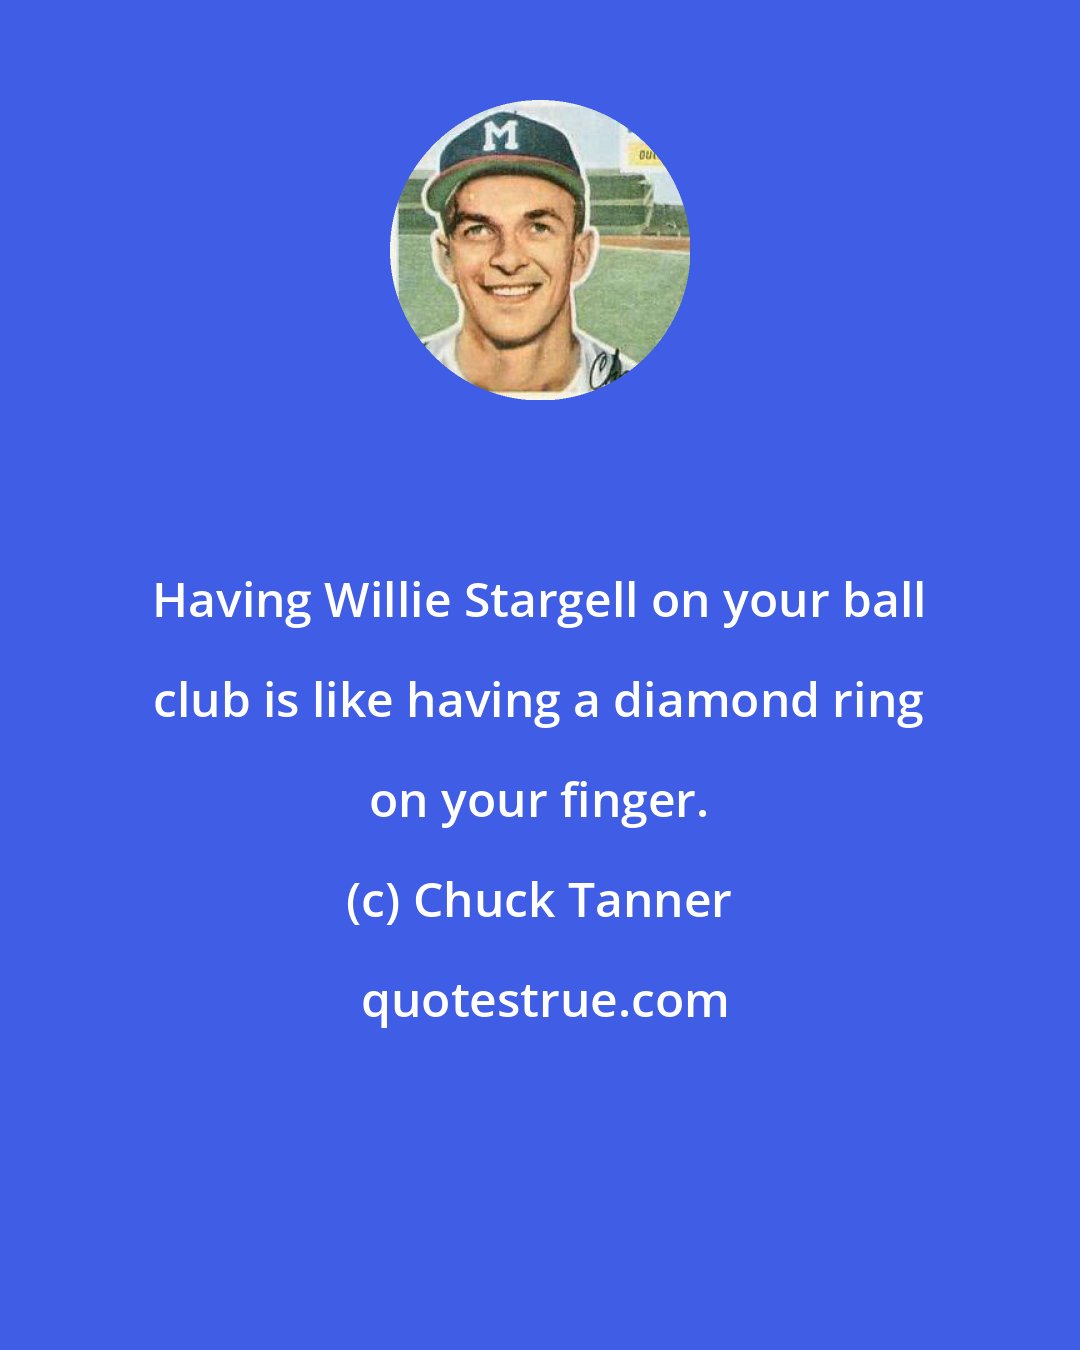 Chuck Tanner: Having Willie Stargell on your ball club is like having a diamond ring on your finger.